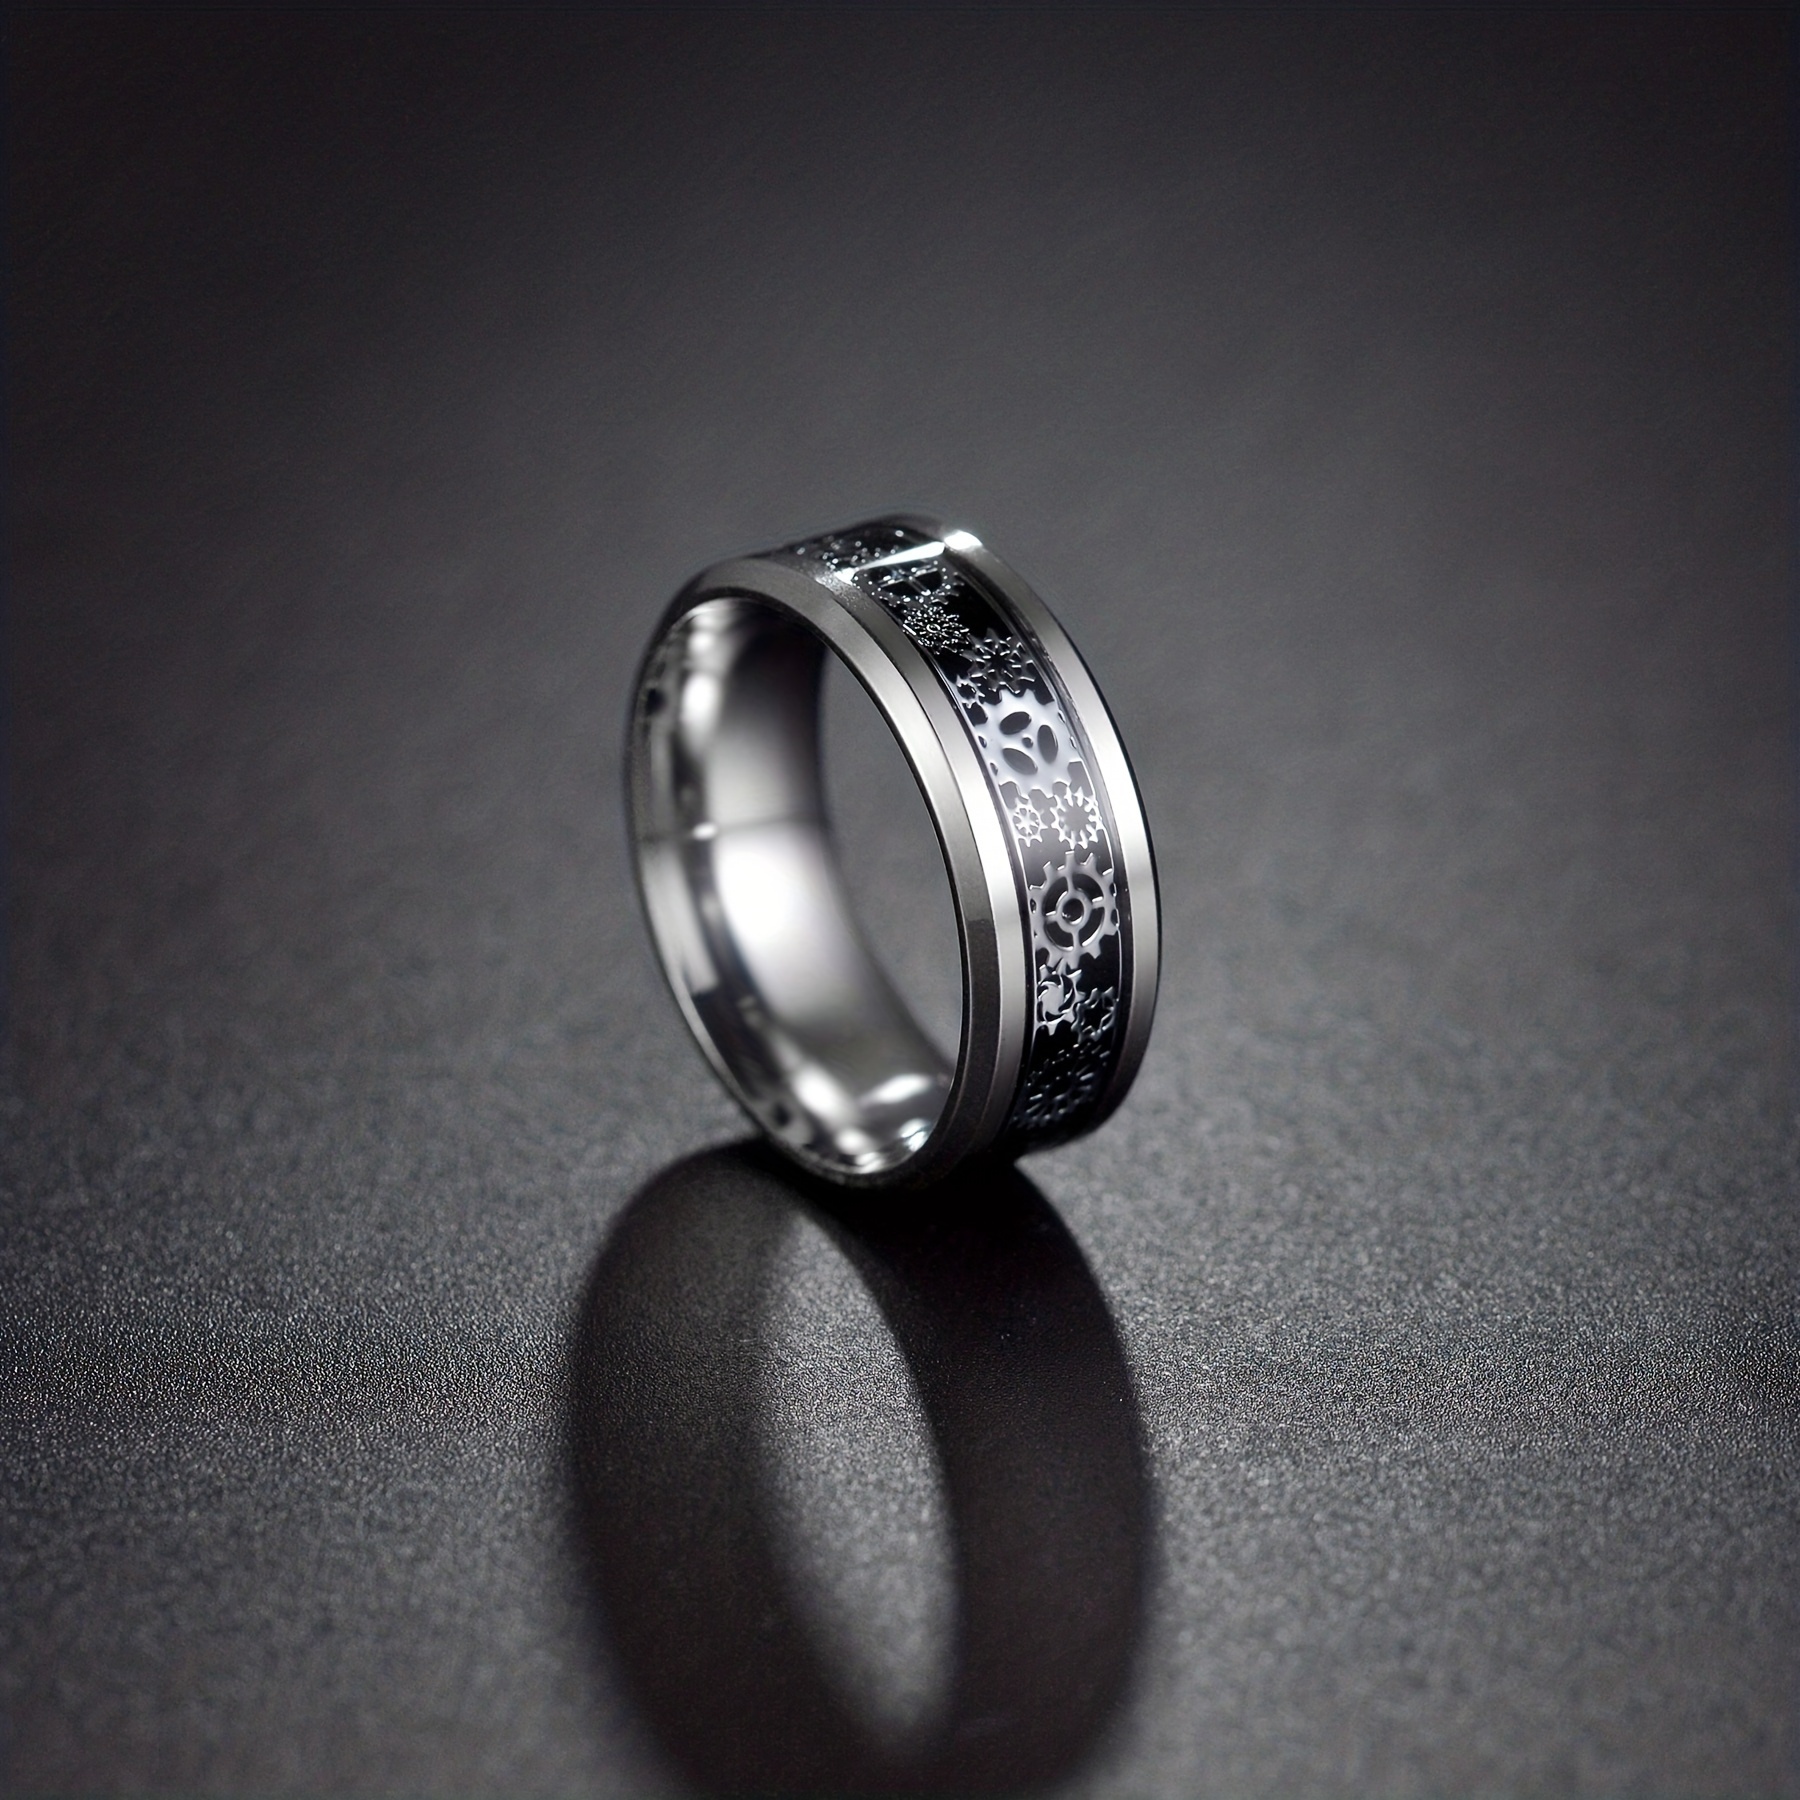 LIMITED EDITION STAINLESS STEEL RINGS